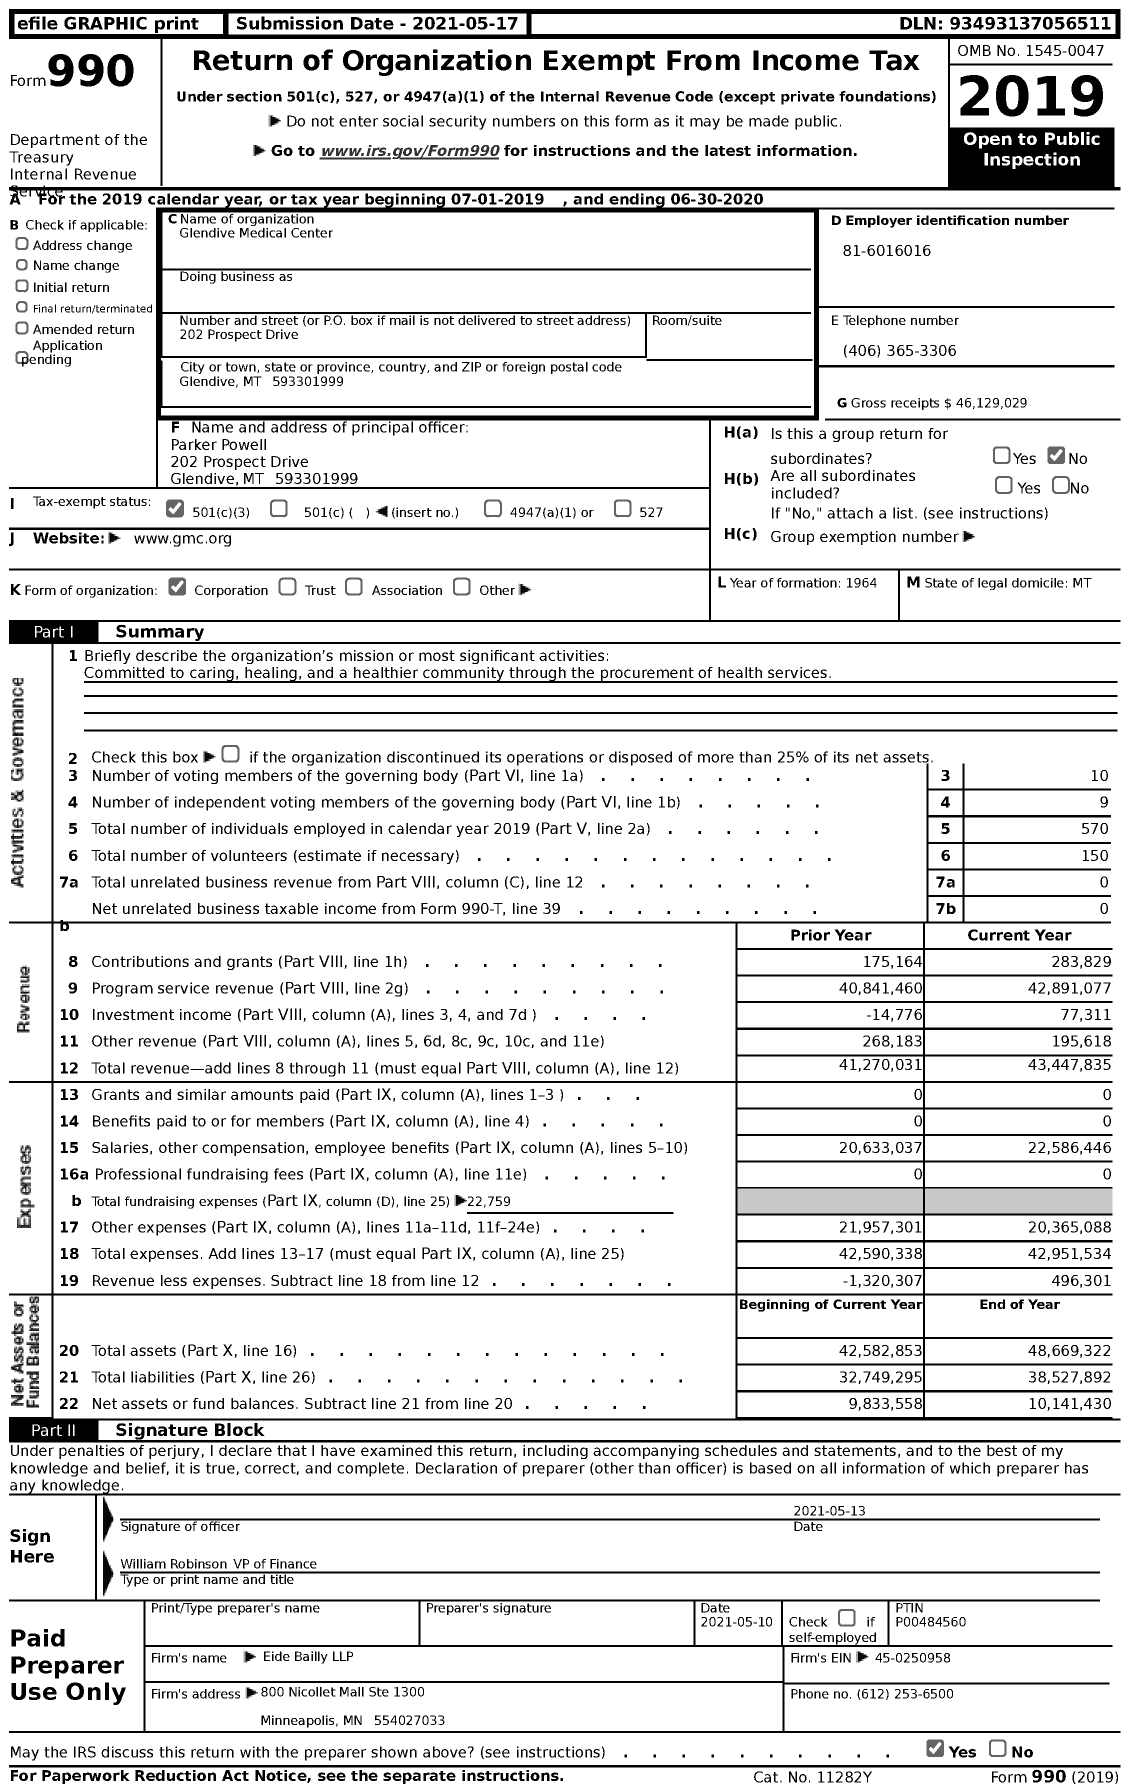 Image of first page of 2019 Form 990 for Glendive Medical Center (GMC)